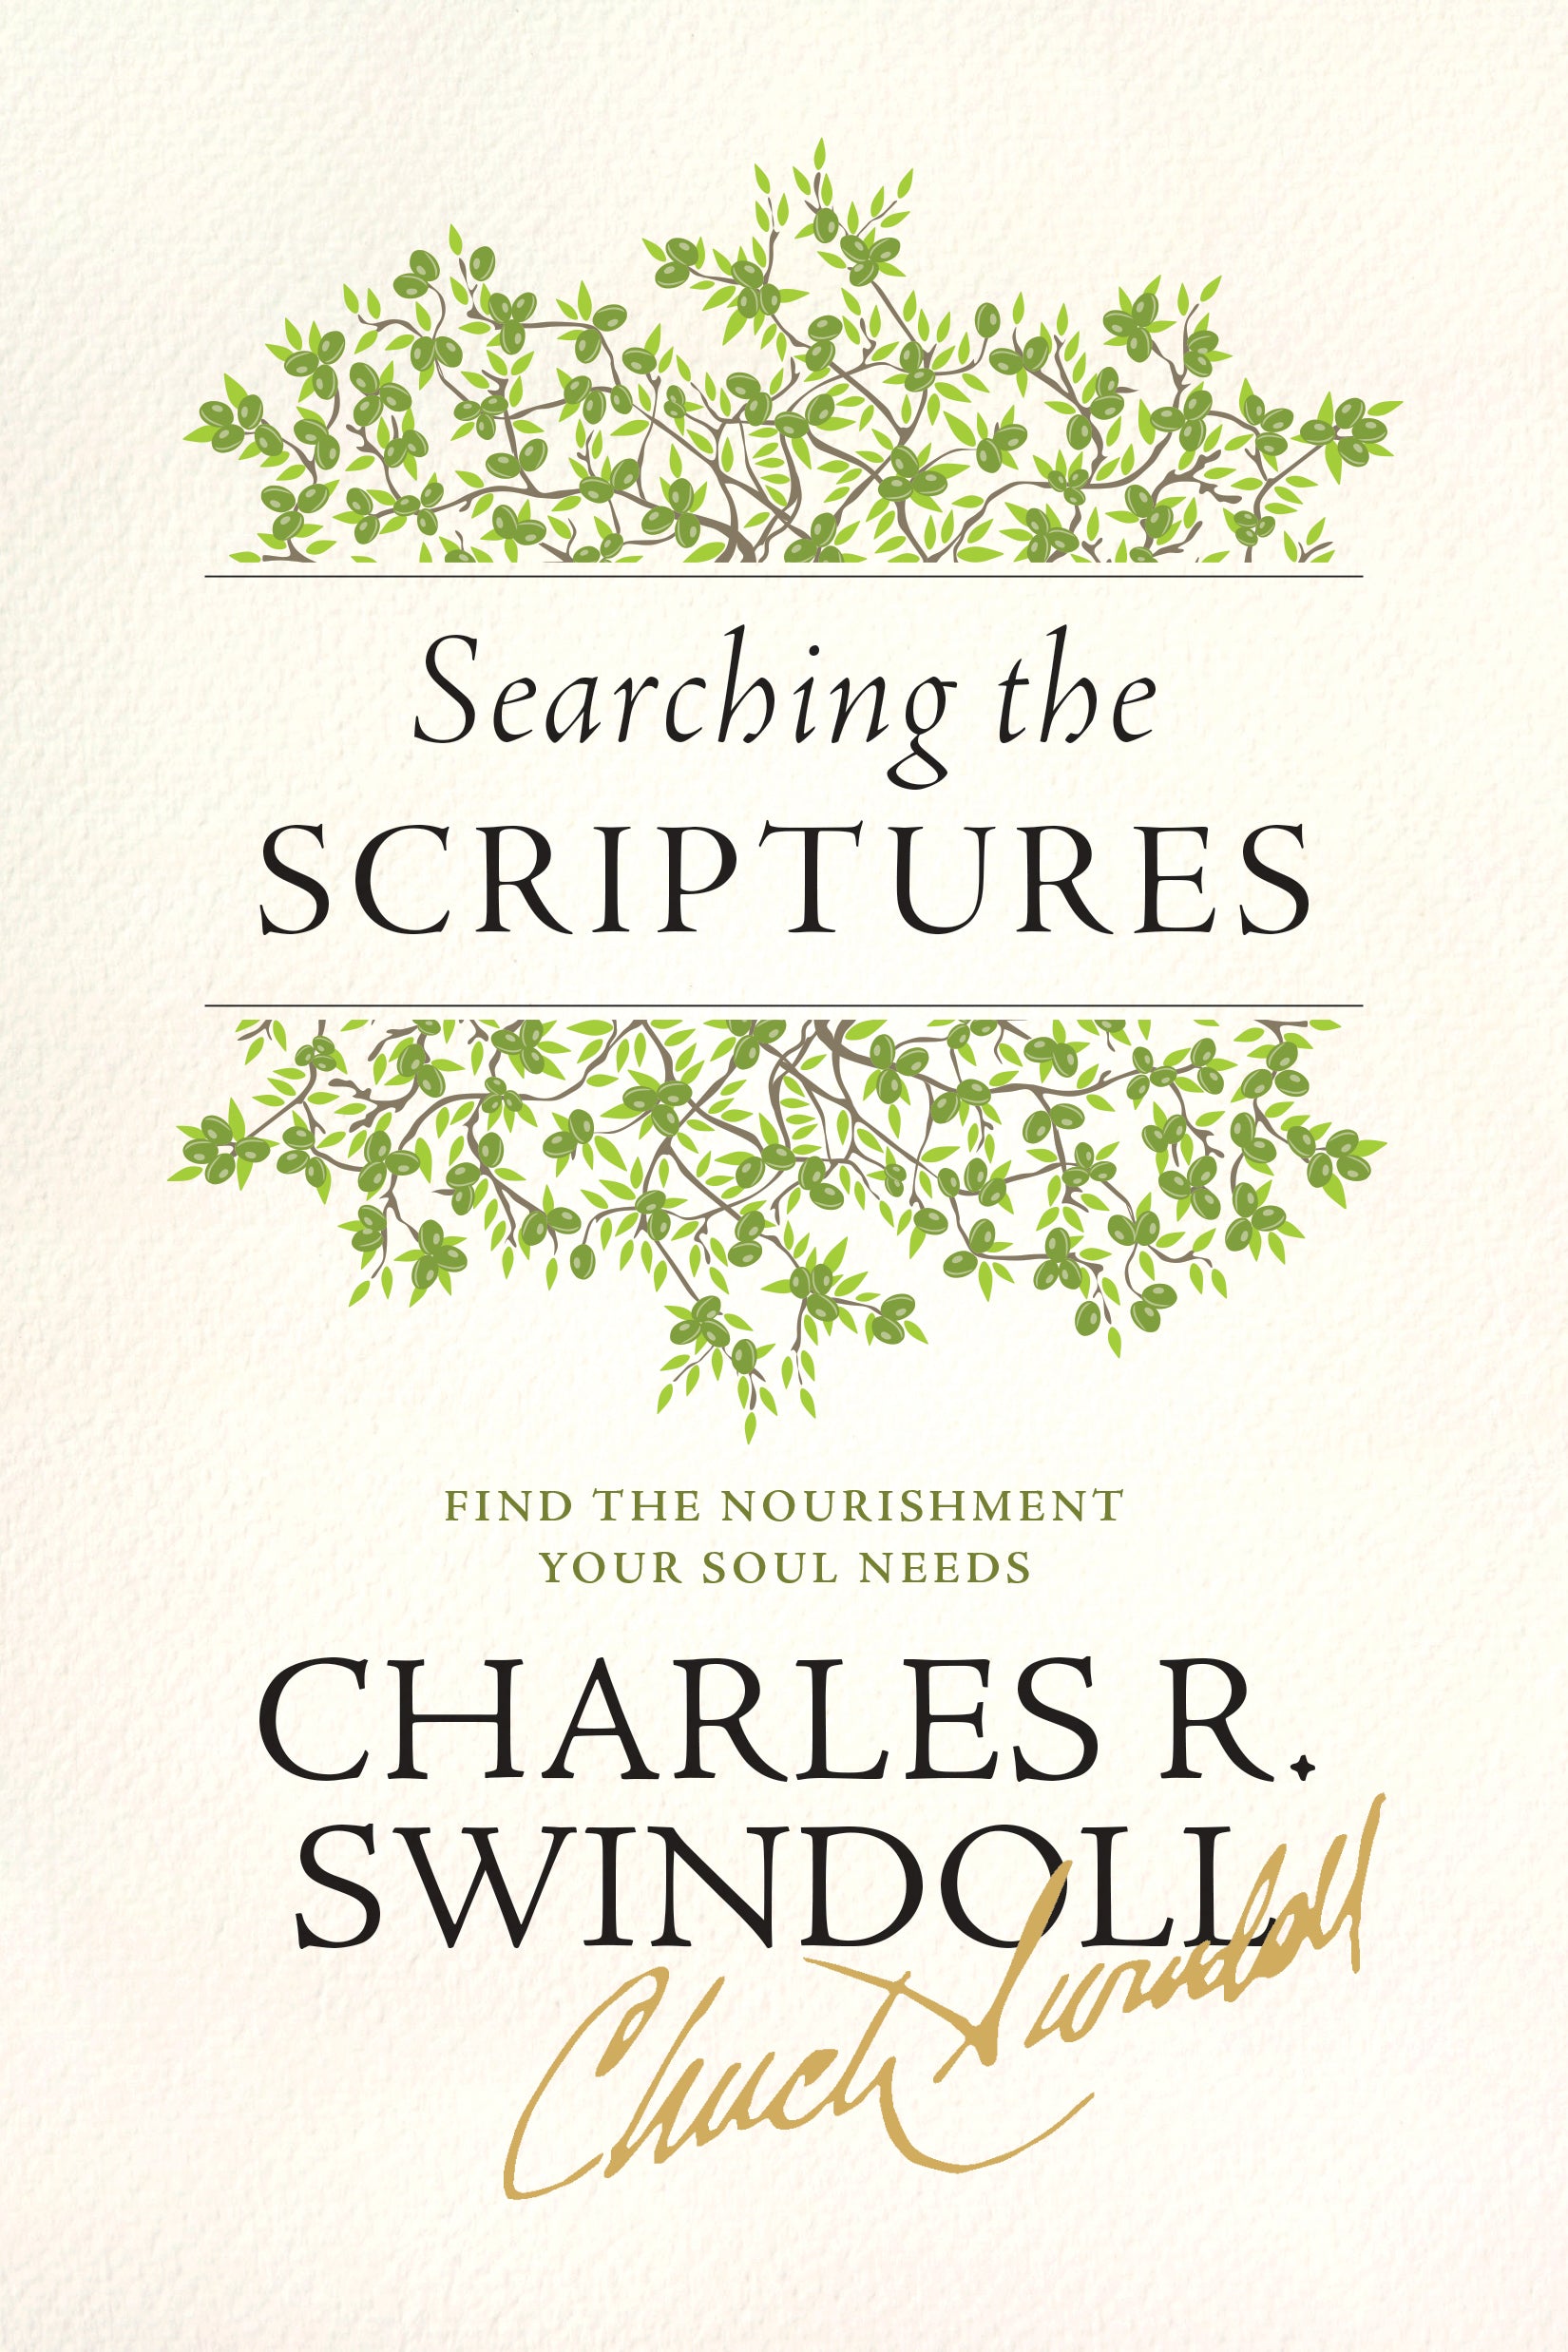 Image of Searching the Scriptures other